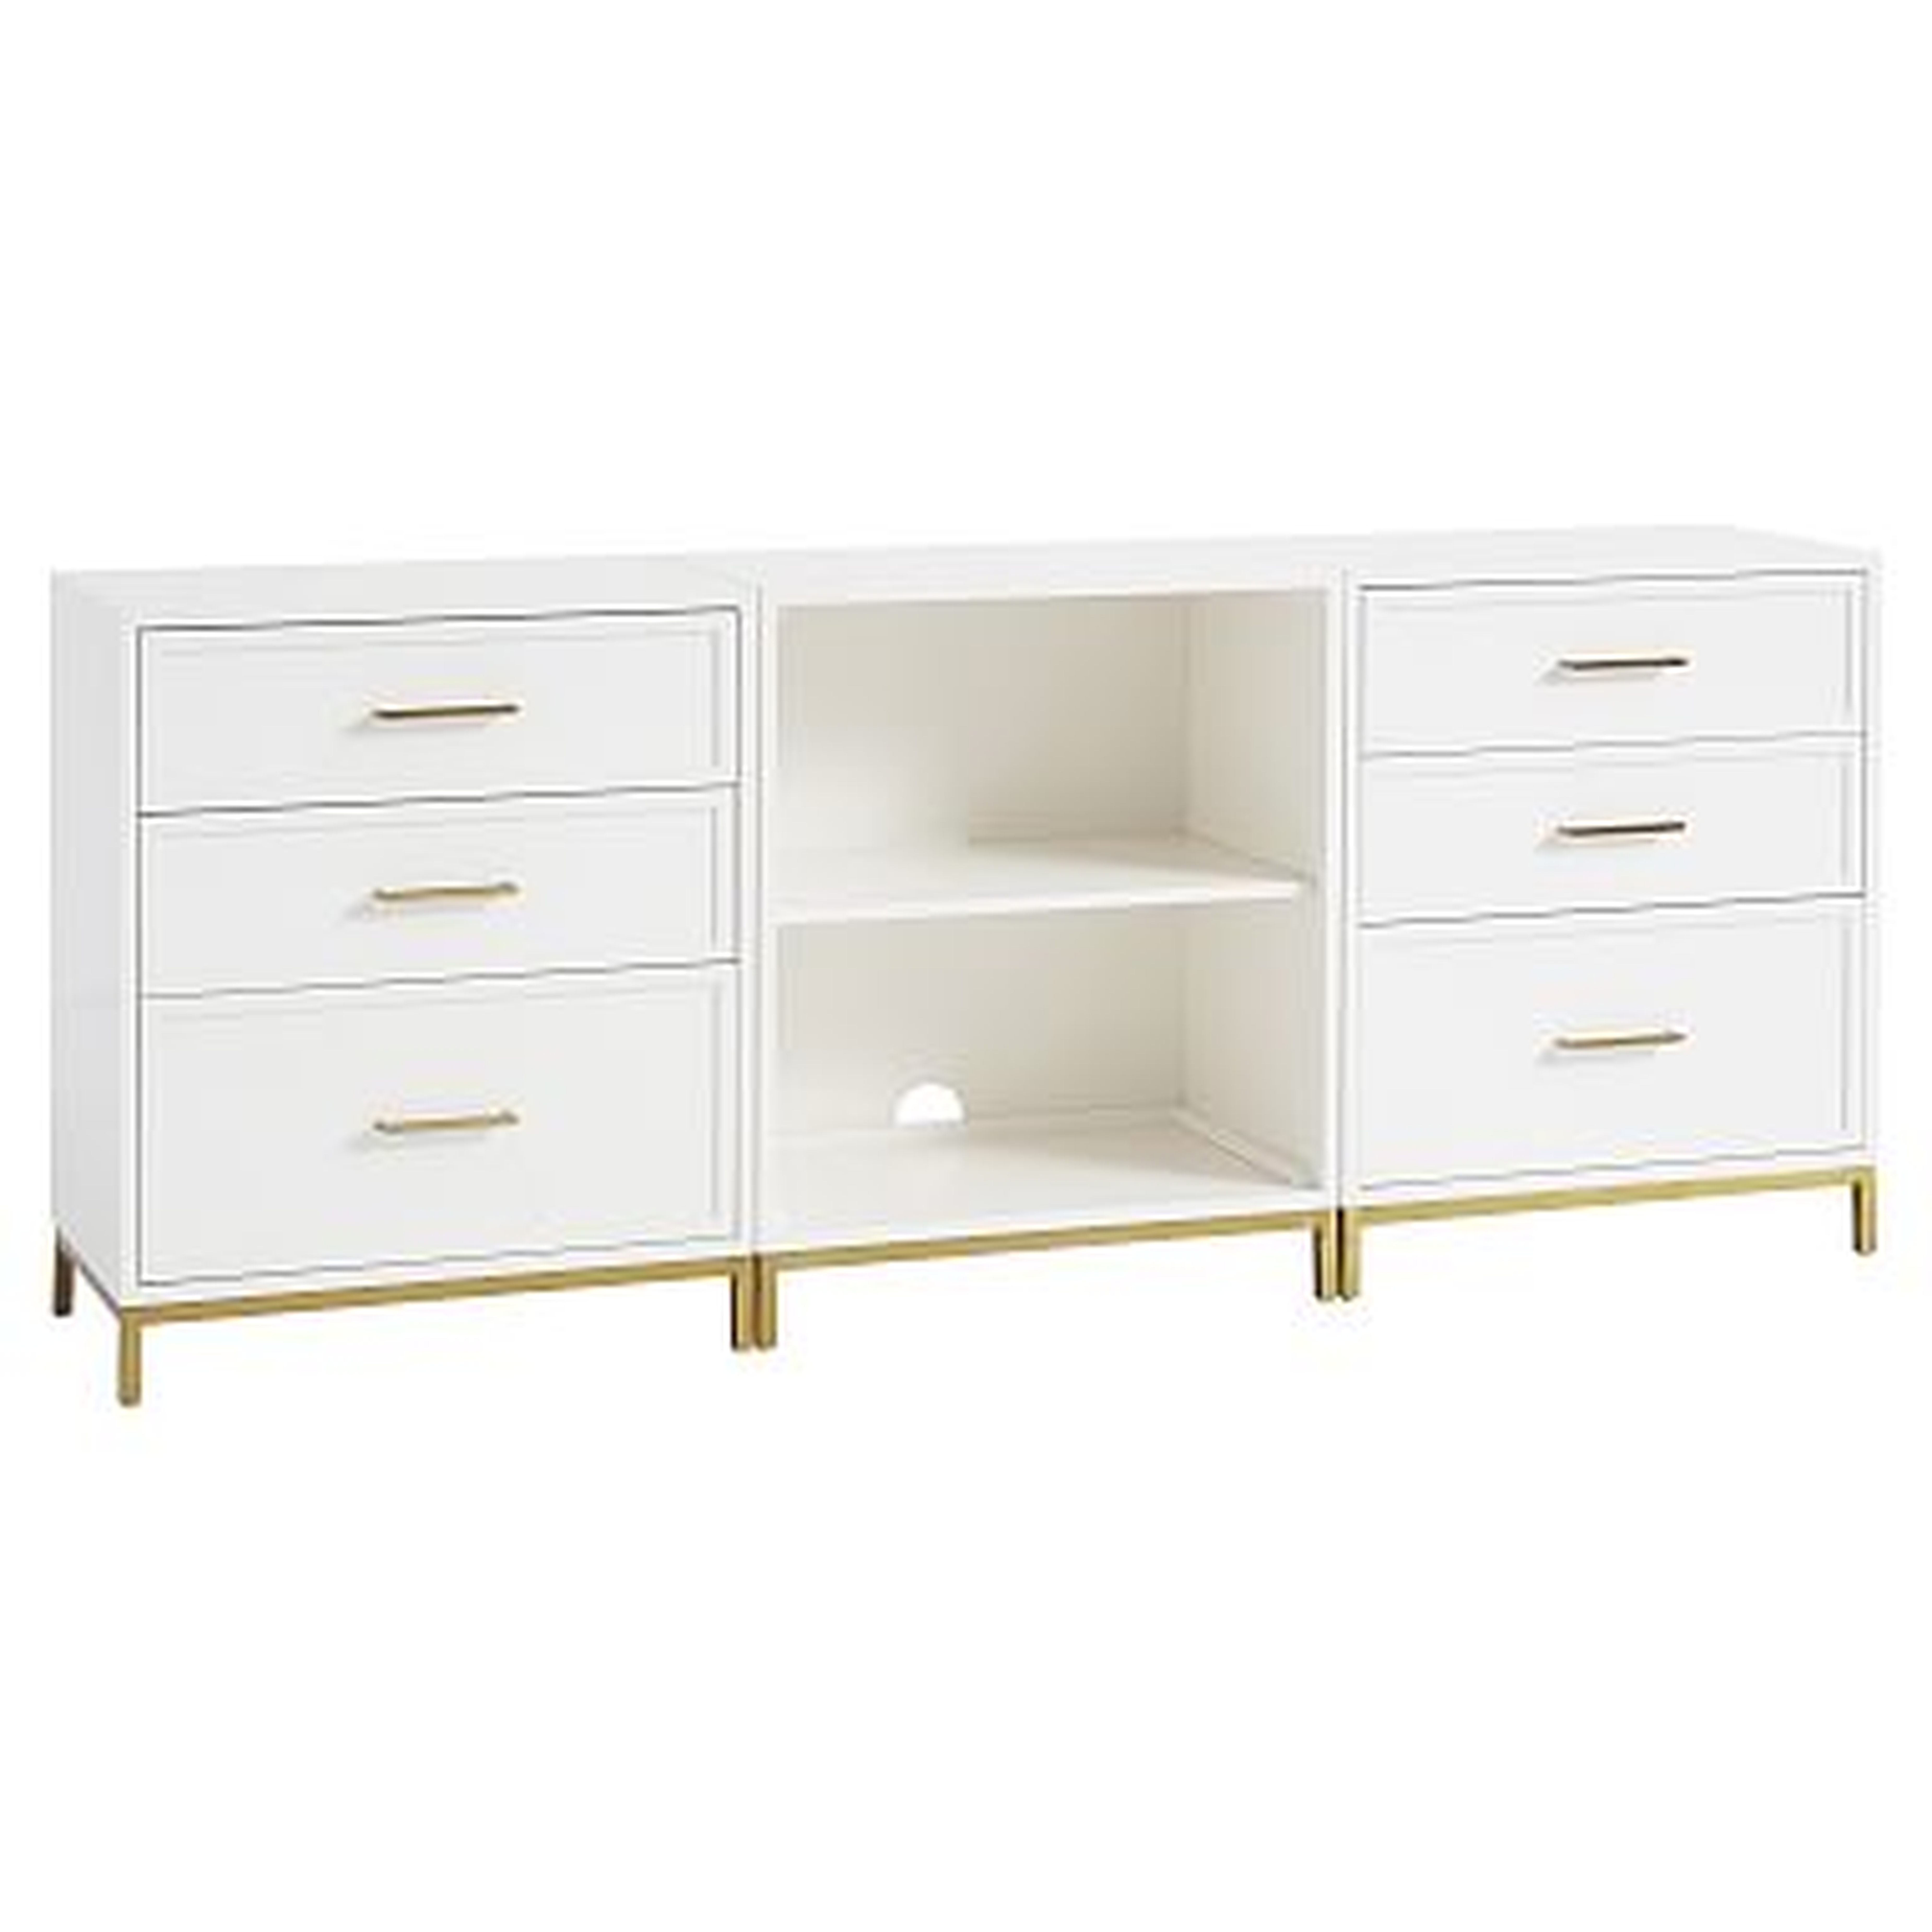 Blaire Triple 3-Drawer Storage Cabinet with Shelves & Base, Simply White - Pottery Barn Teen